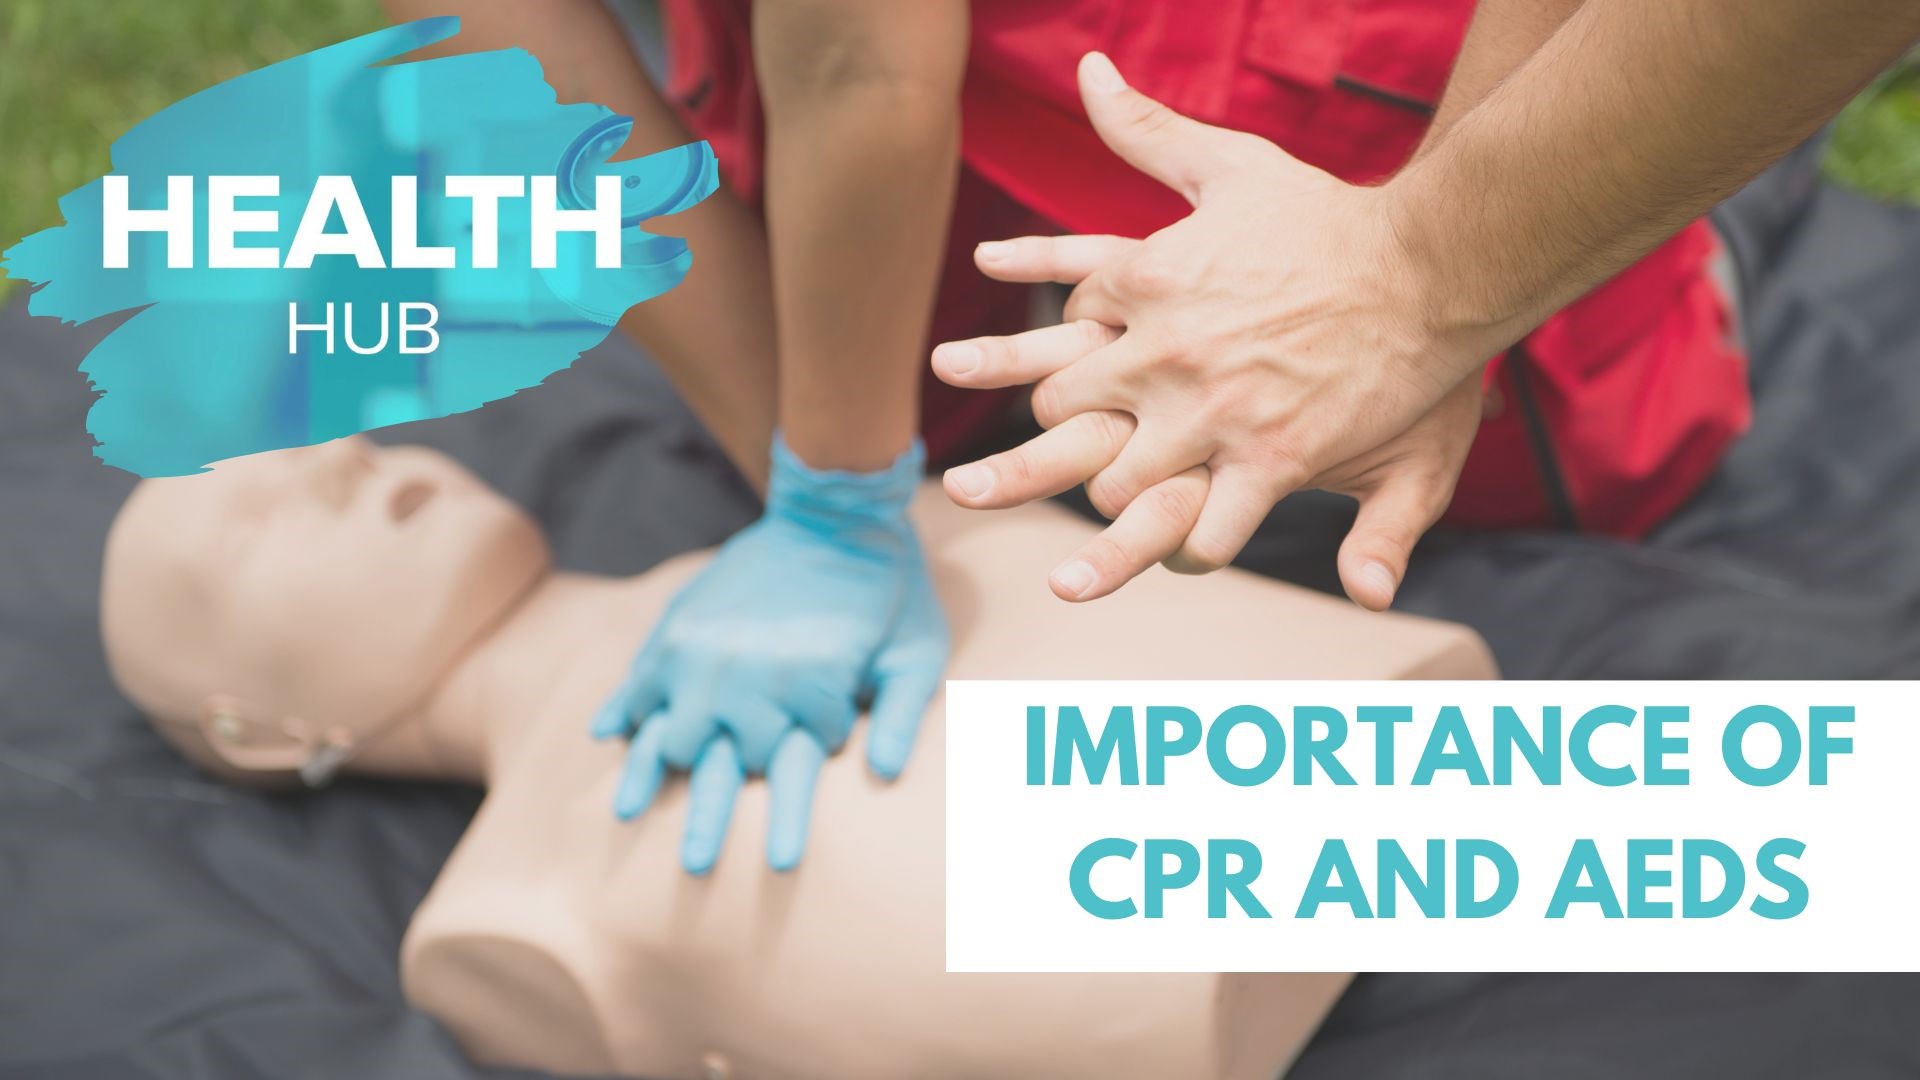 Learning how to perform CPR and how to use AEDs can be lifesaving tools.